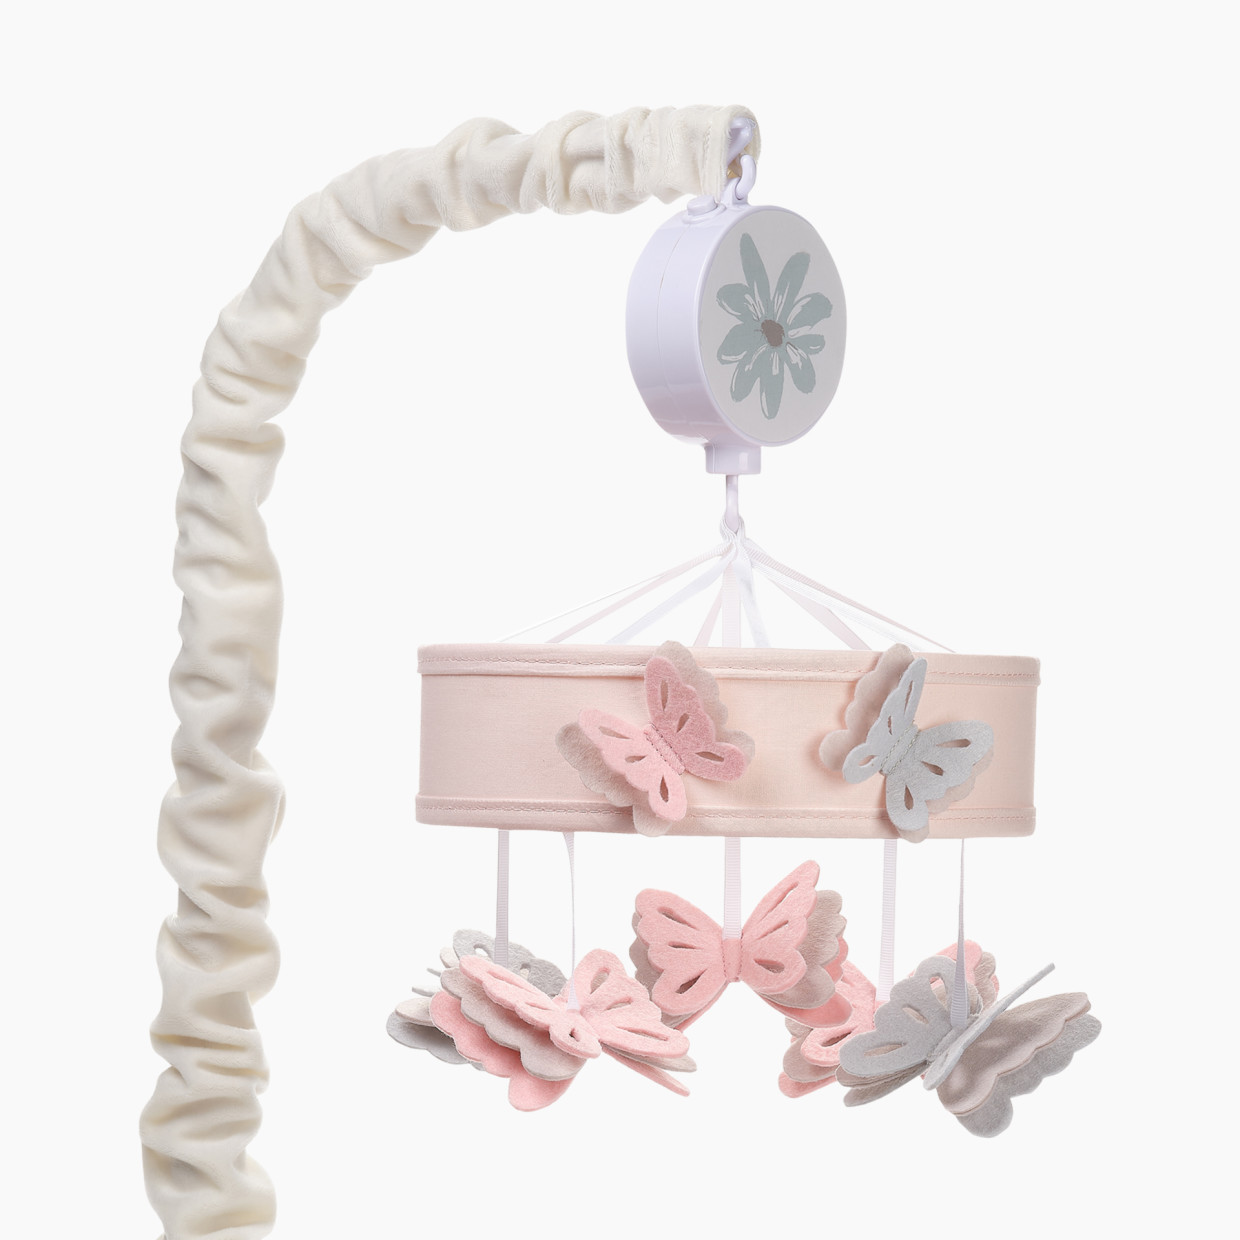 Lambs & Ivy Musical Baby Crib Mobile - Baby Blooms.